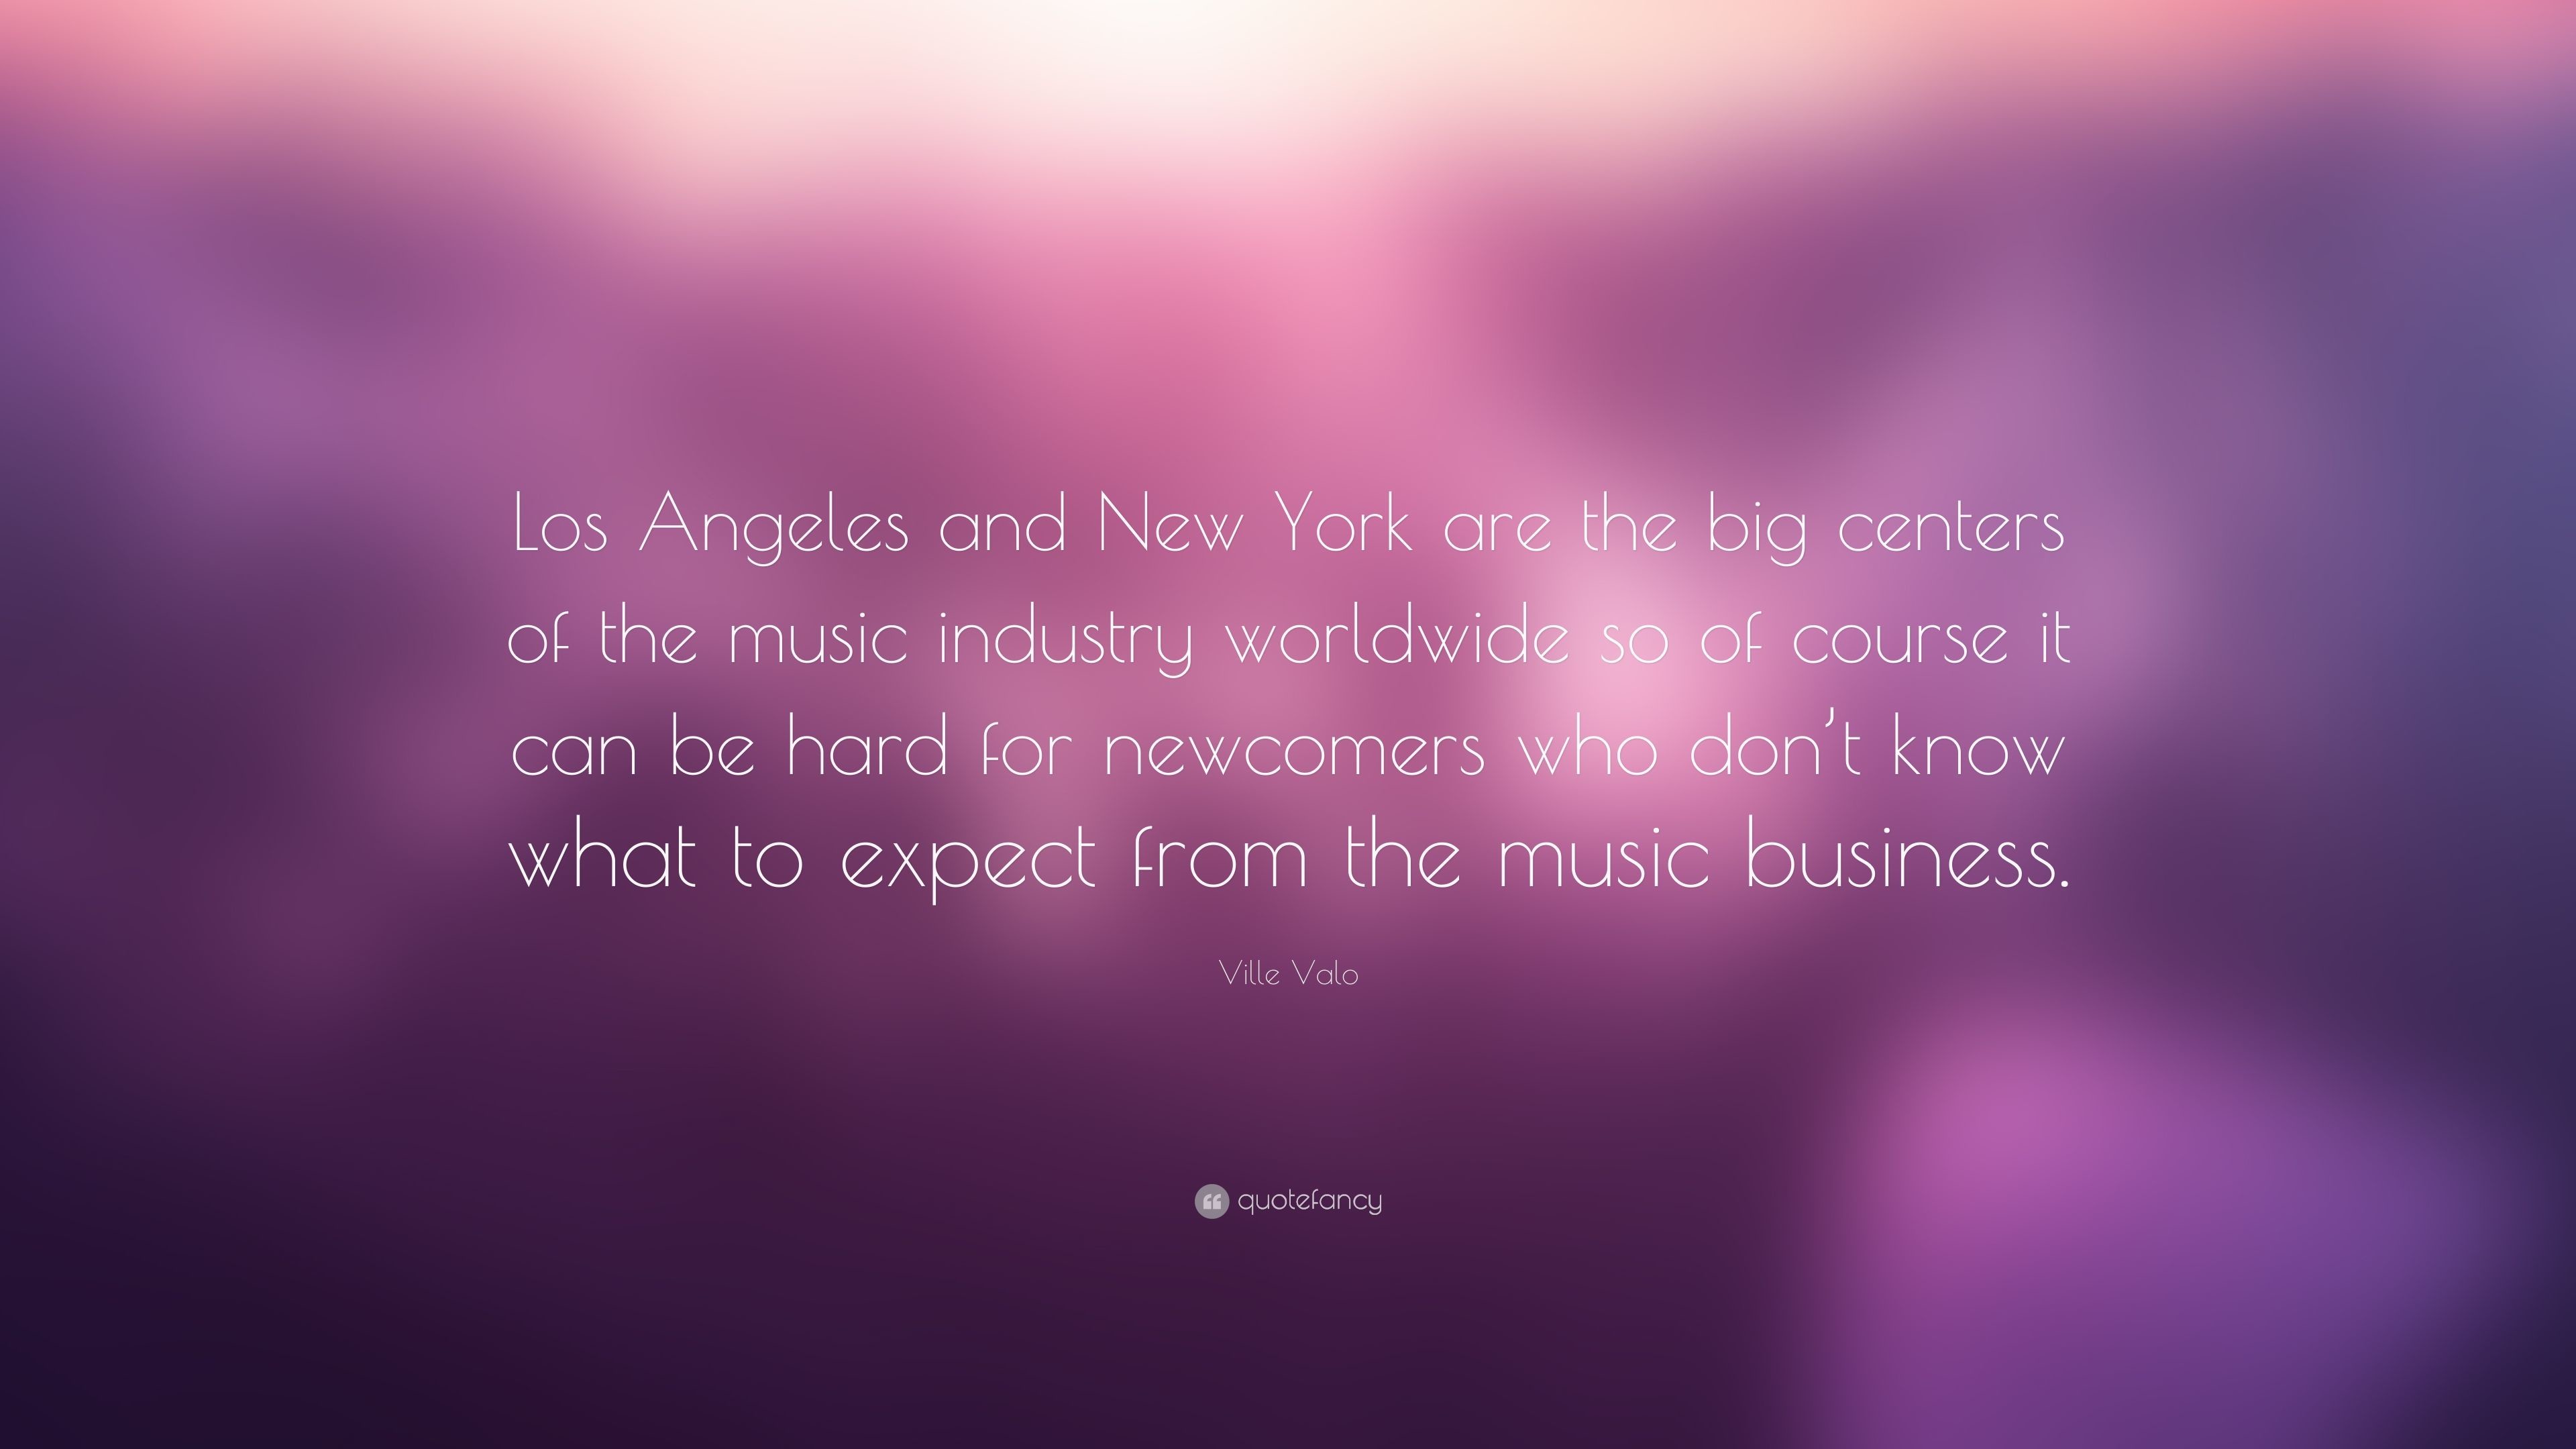 3840x2160 Ville Valo Quote: “Los Angeles and New York are the big centers of the